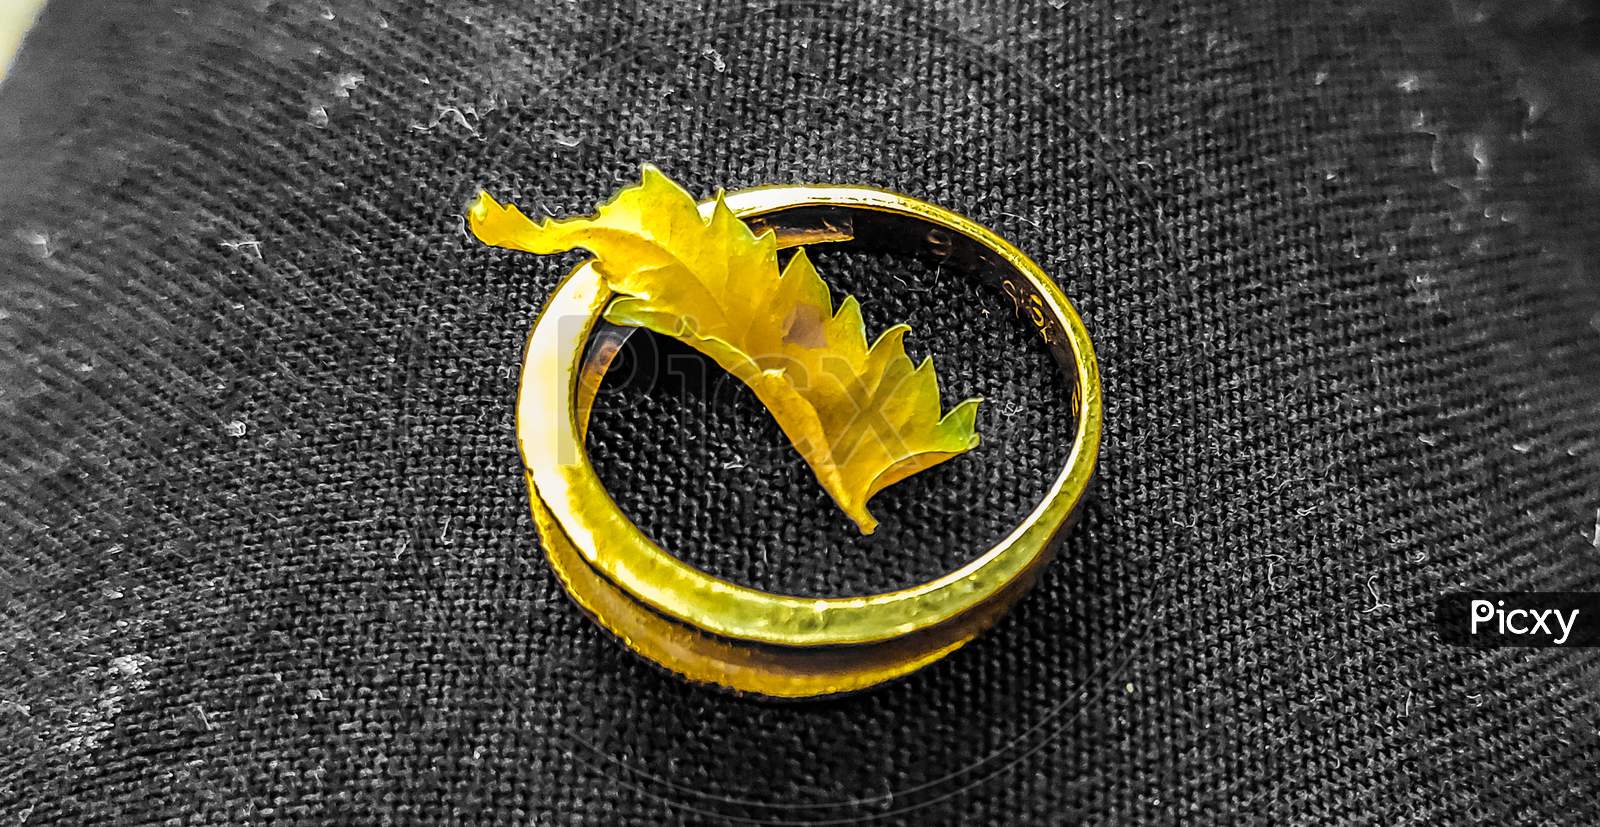 A tiny dried leaf on a beautiful golden ring.